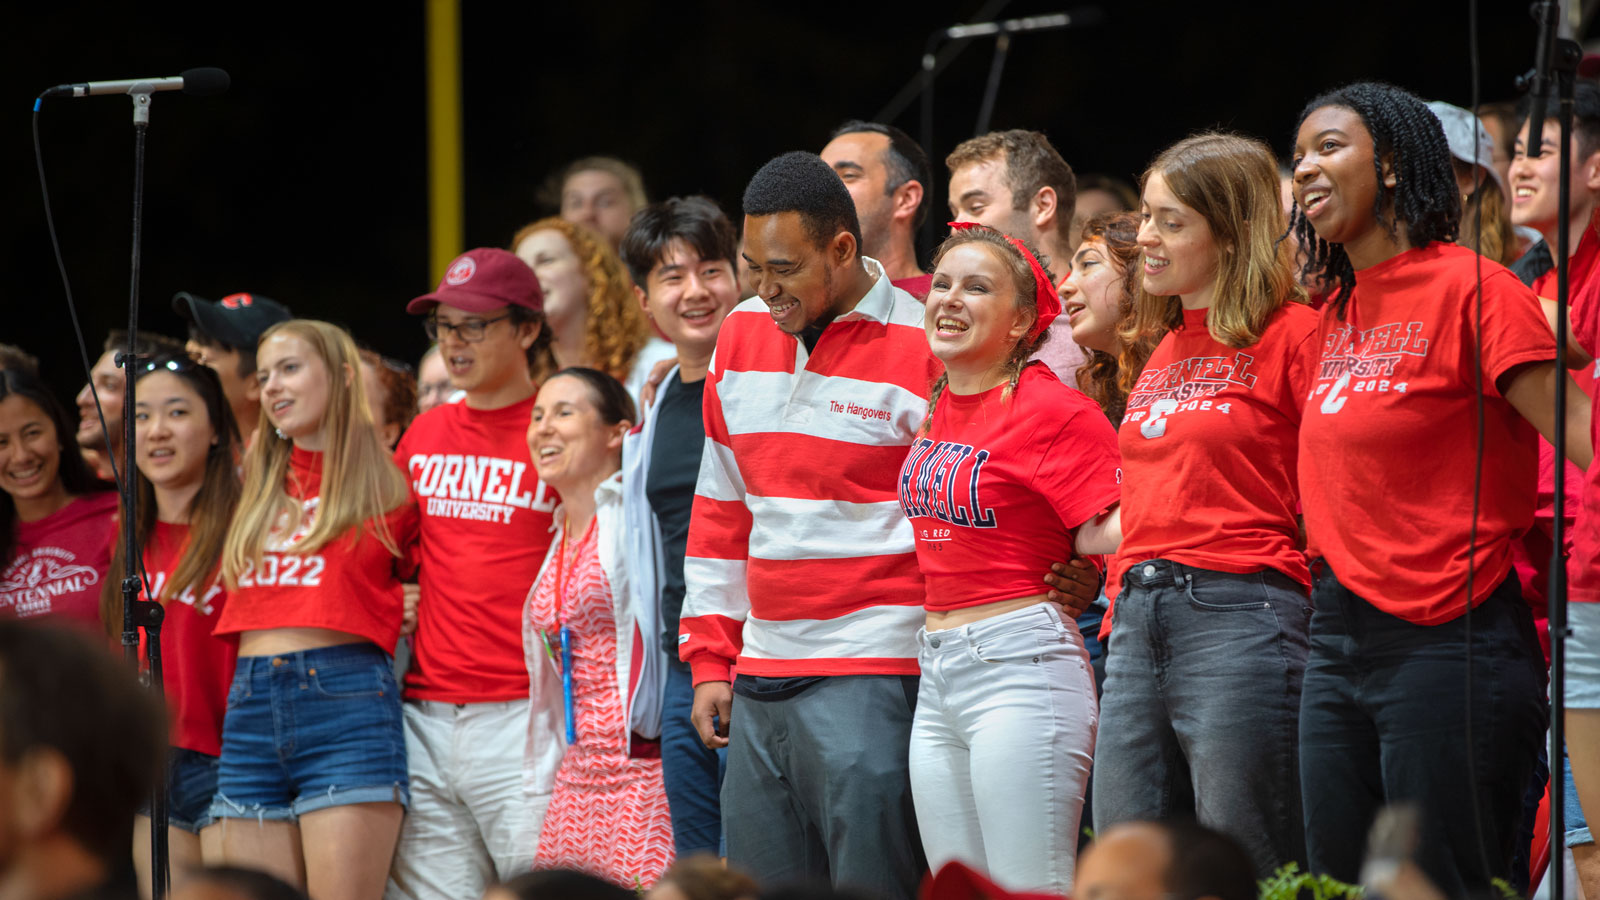 Students arm-in-arm singing the Cornell alma mater.